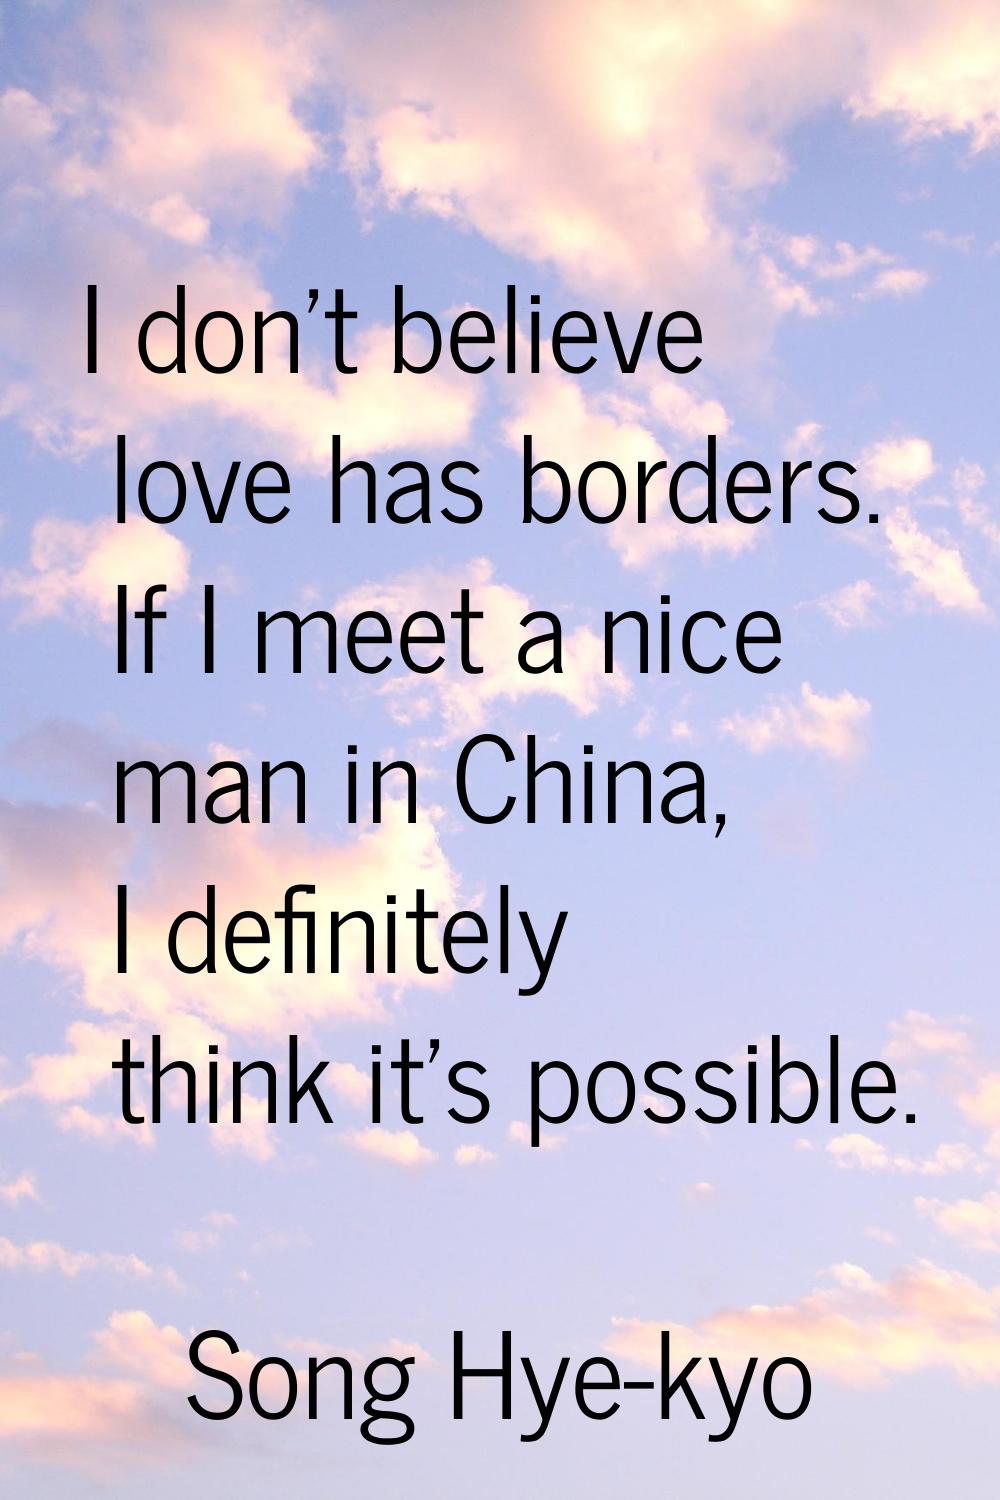 I don't believe love has borders. If I meet a nice man in China, I definitely think it's possible.